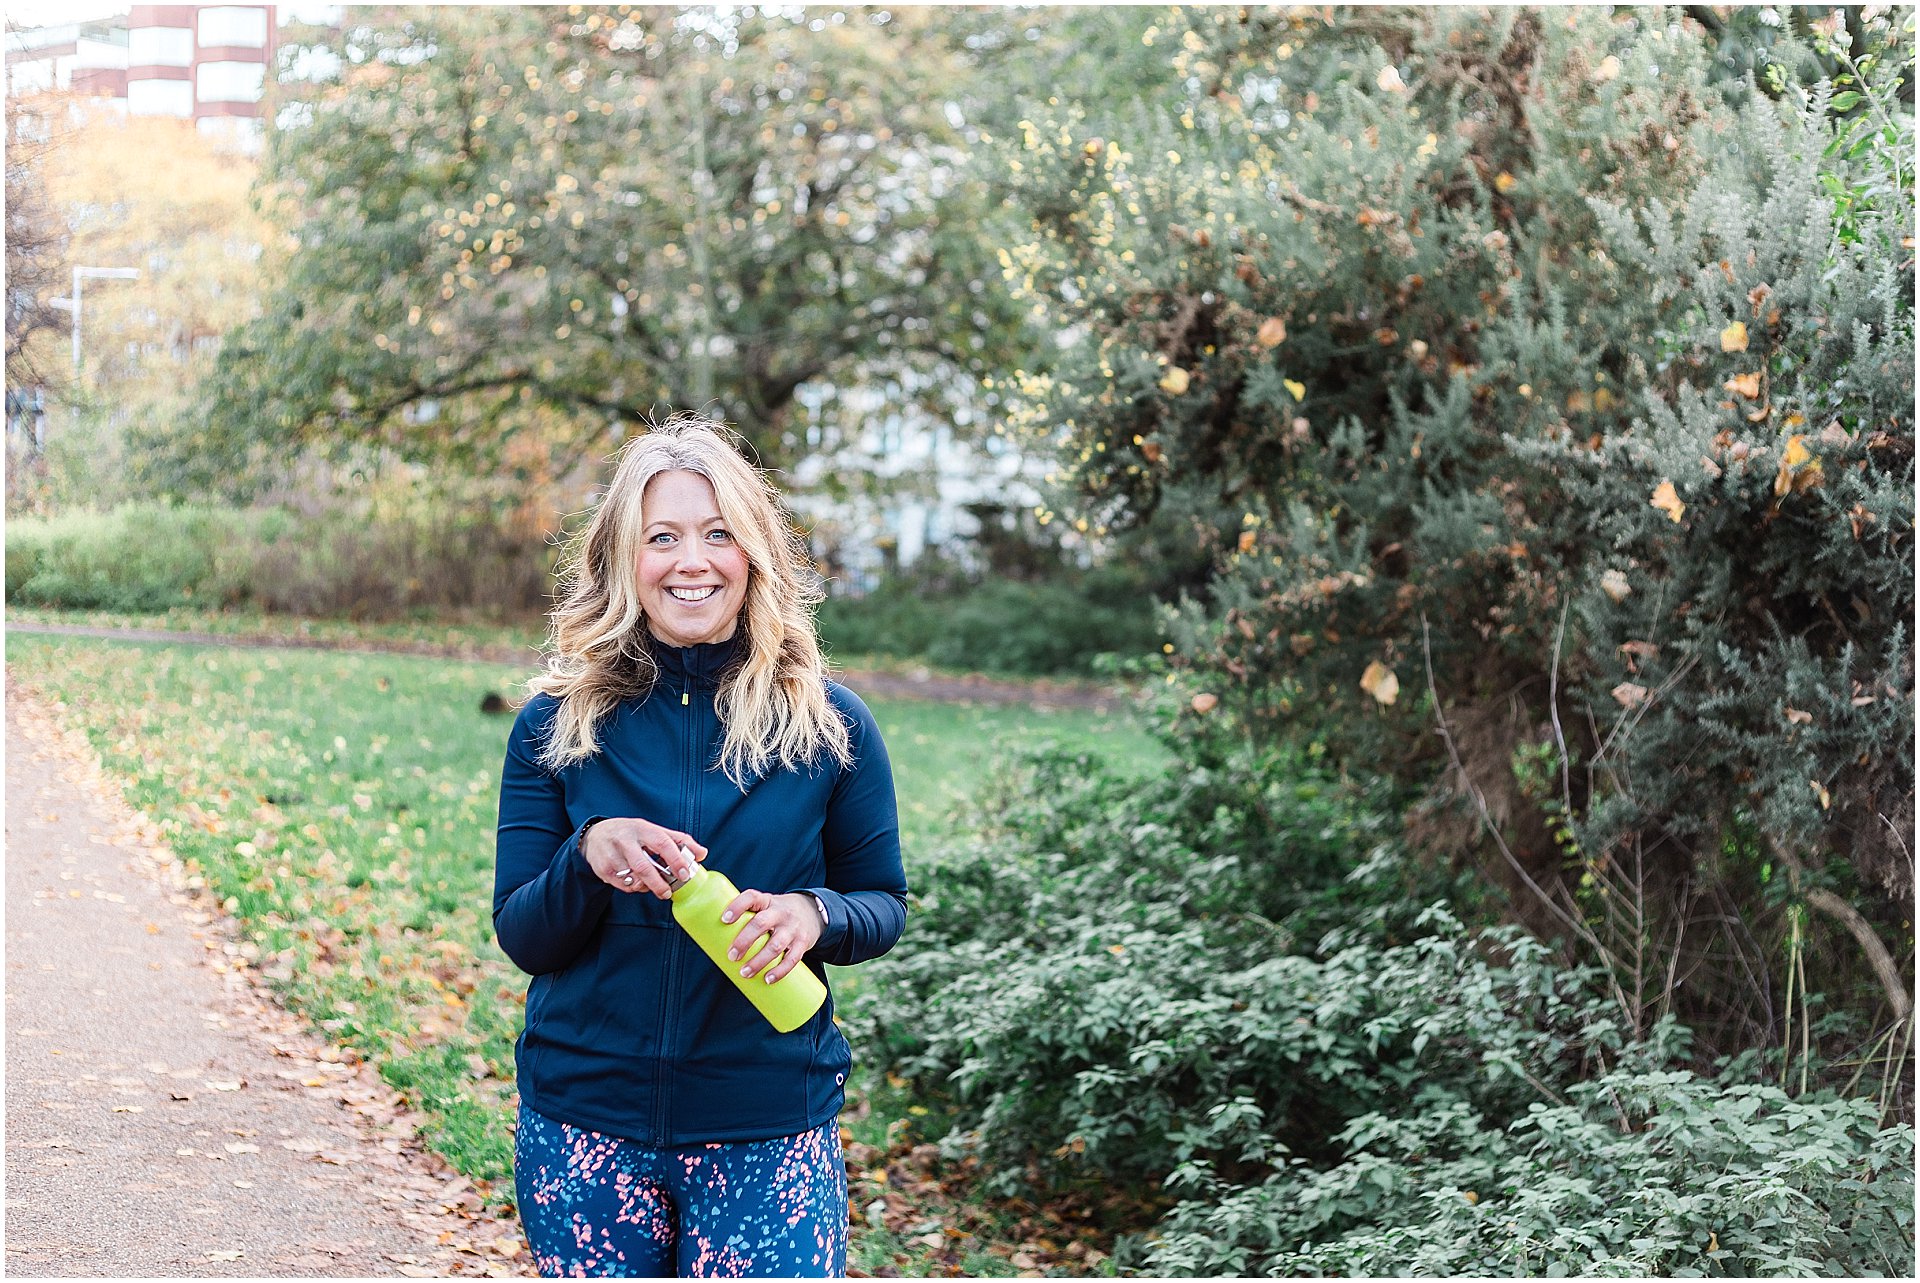 Smiling white woman with blonde hair holding a yellow water bottle, dressed in athletic wear with a navy top and floral leggings, standing in a park setting with autumn leaves and greenery

Image taken by London brand photographer AKP Branding Stories for the blog post From Snapshots to Storytelling: The Evolution of Brand Photography